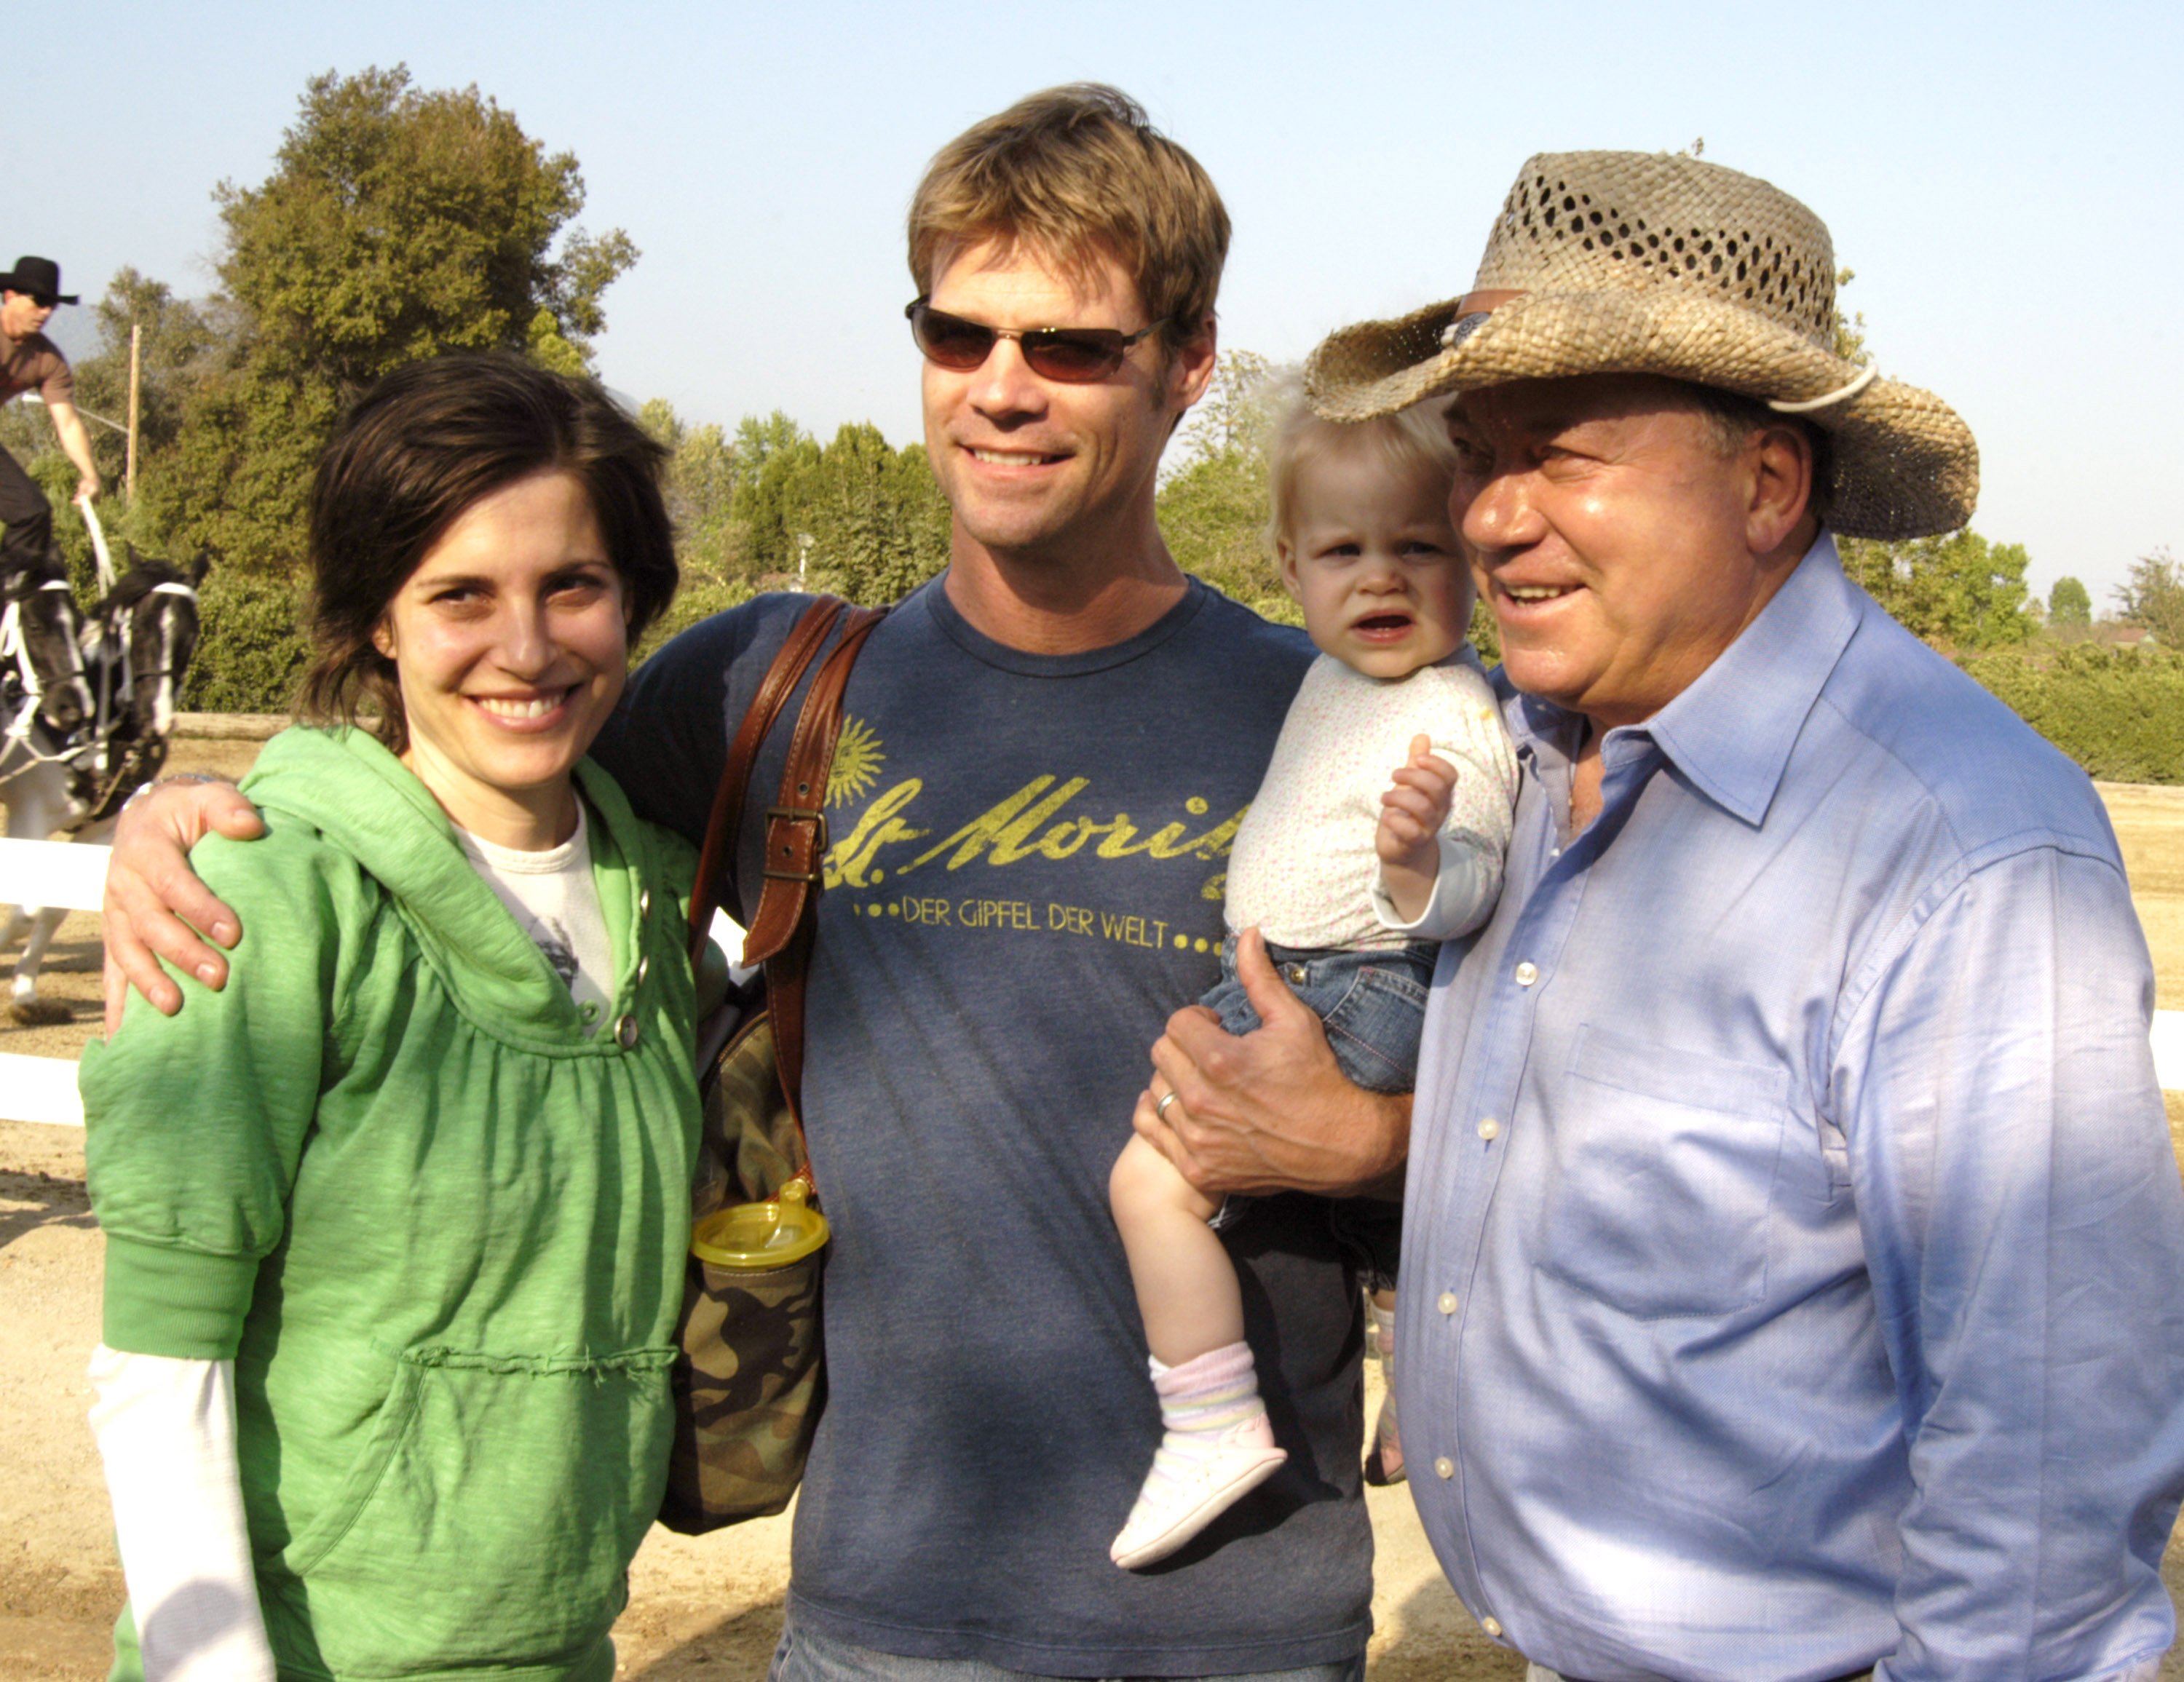 Melanie Shatner, Joel Gretsch, their daughter Willow, and William Shatner at the Wells Fargo Hollywood Charity Horse Show on April 29, 2006 | Source: Getty Images